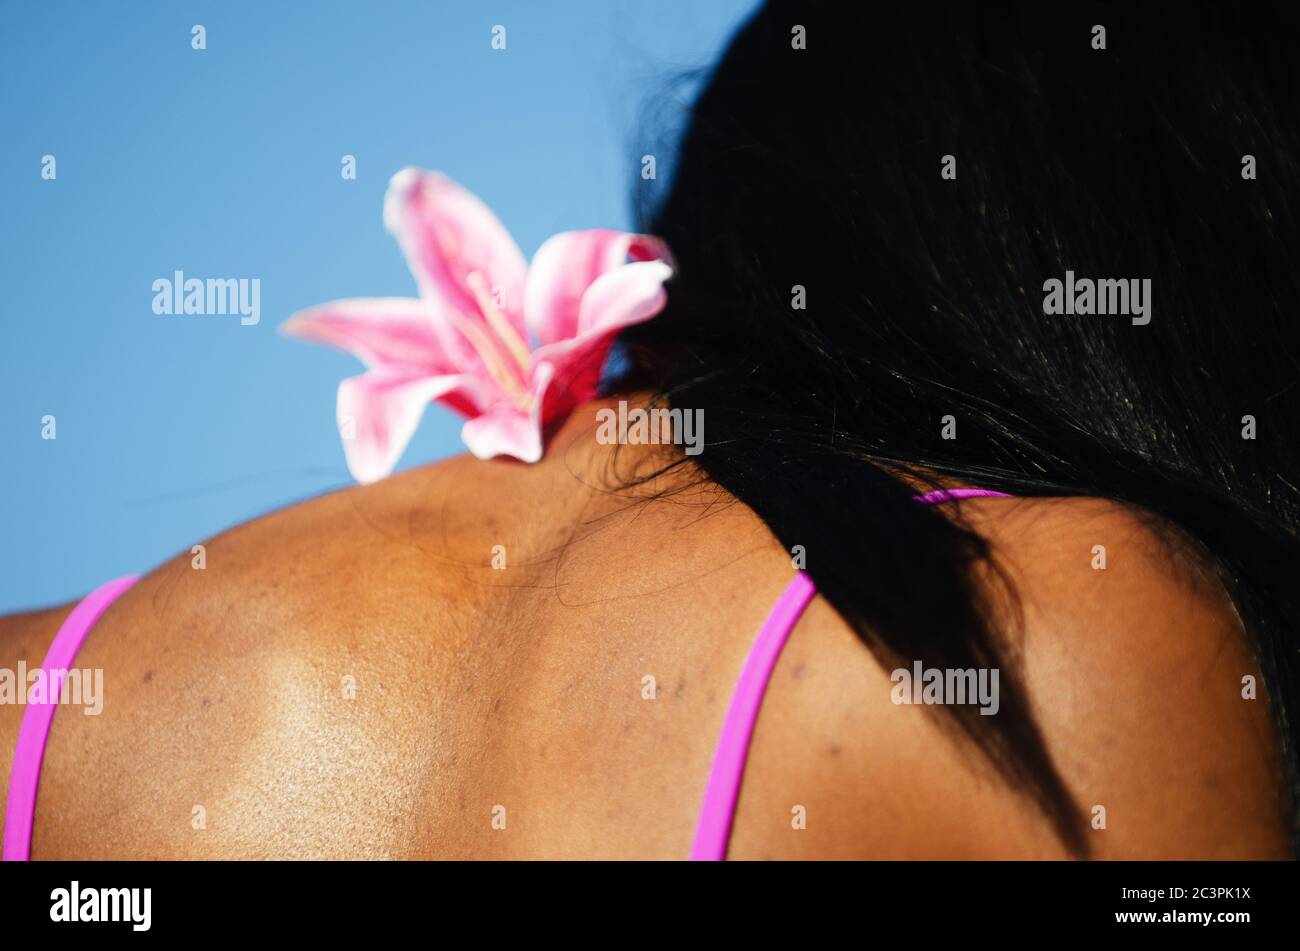 Colorful pink flower decoration resting on the shoulder of an unrecognizable young woman under bright blue sky copy space Stock Photo